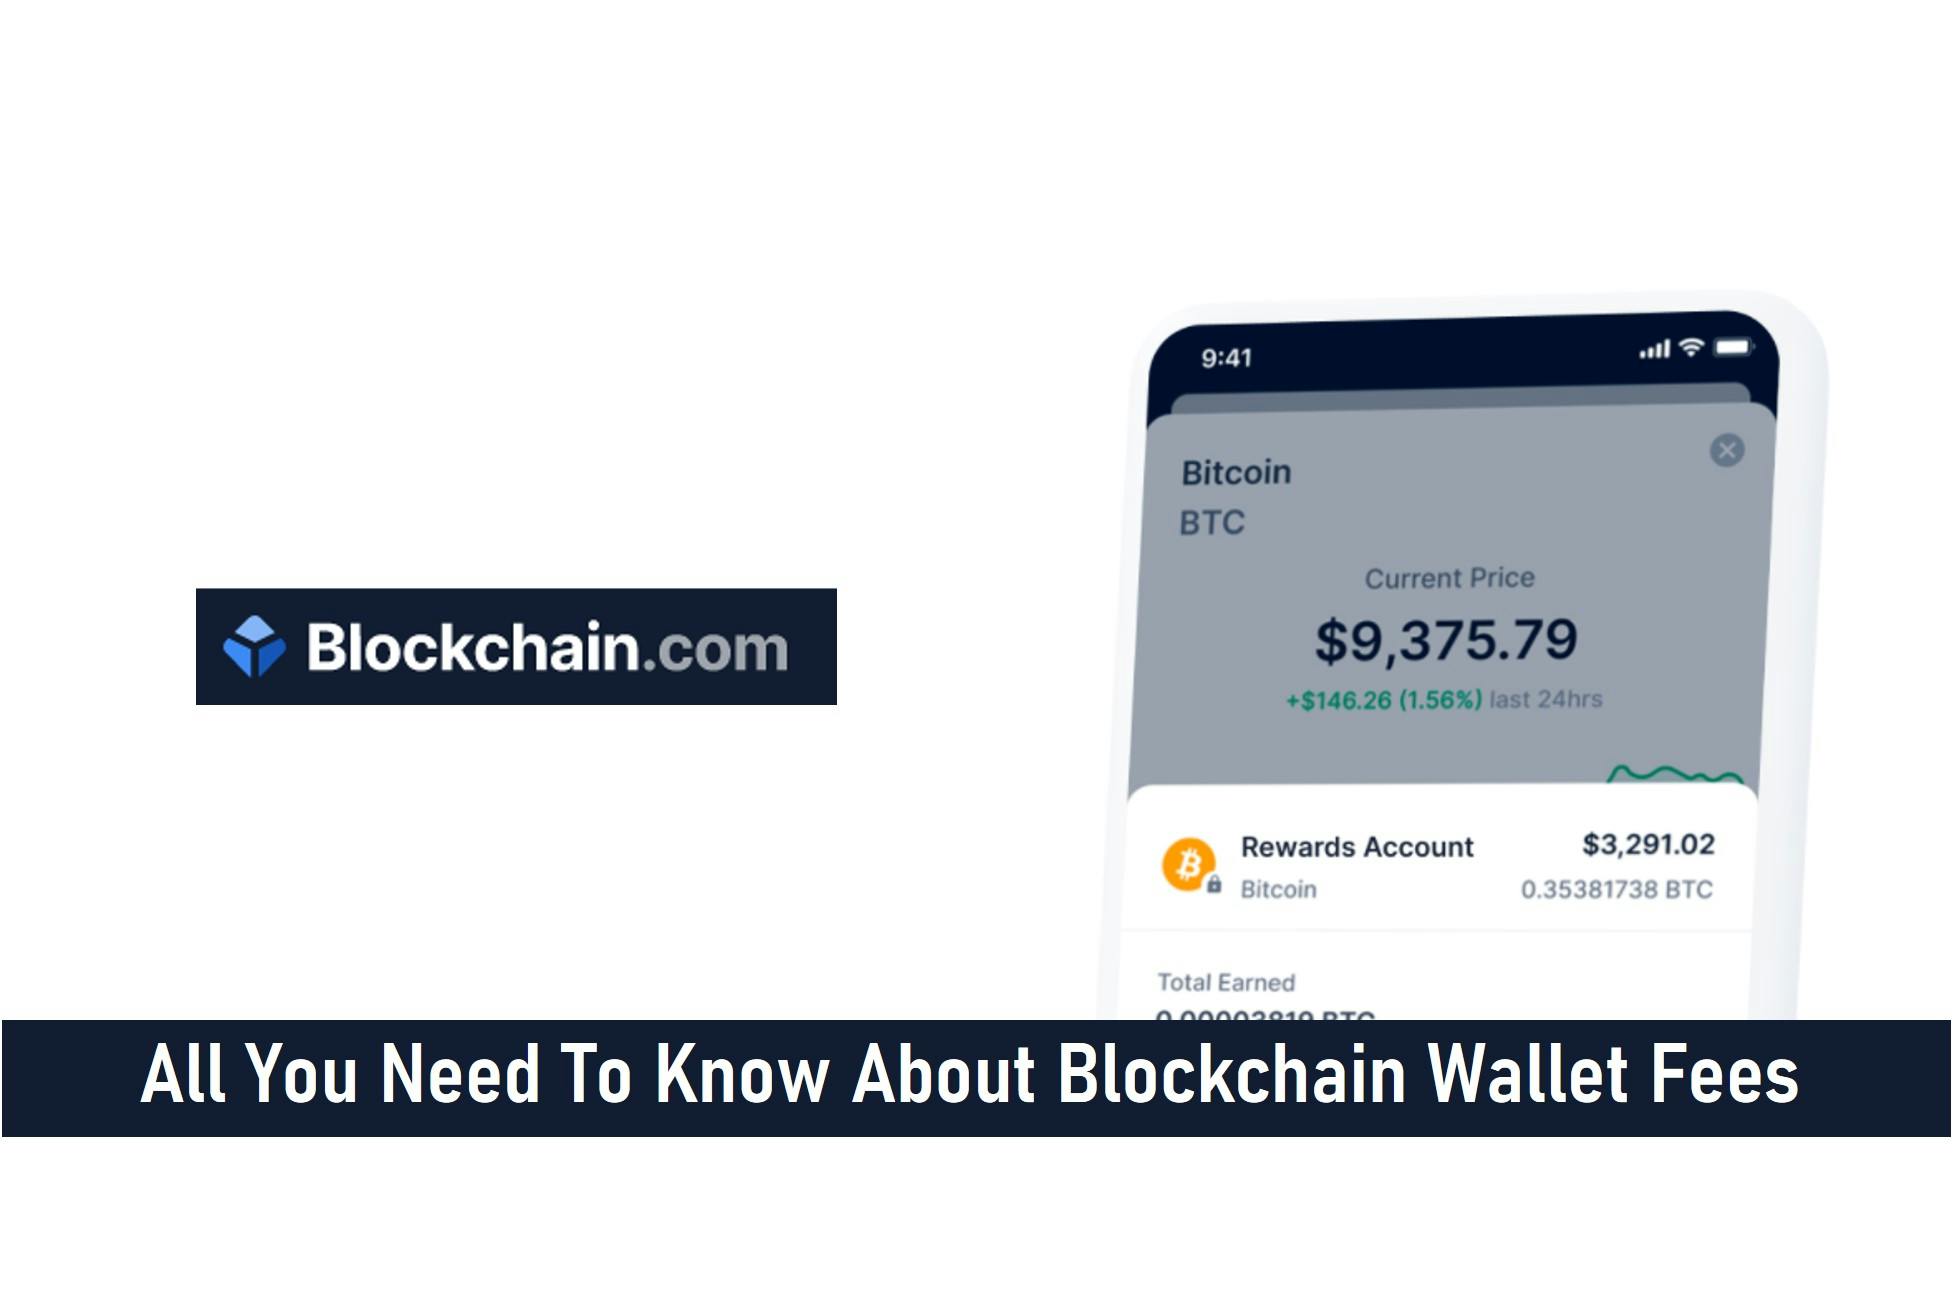 All You Need to Know About Blockchain Wallet Fees